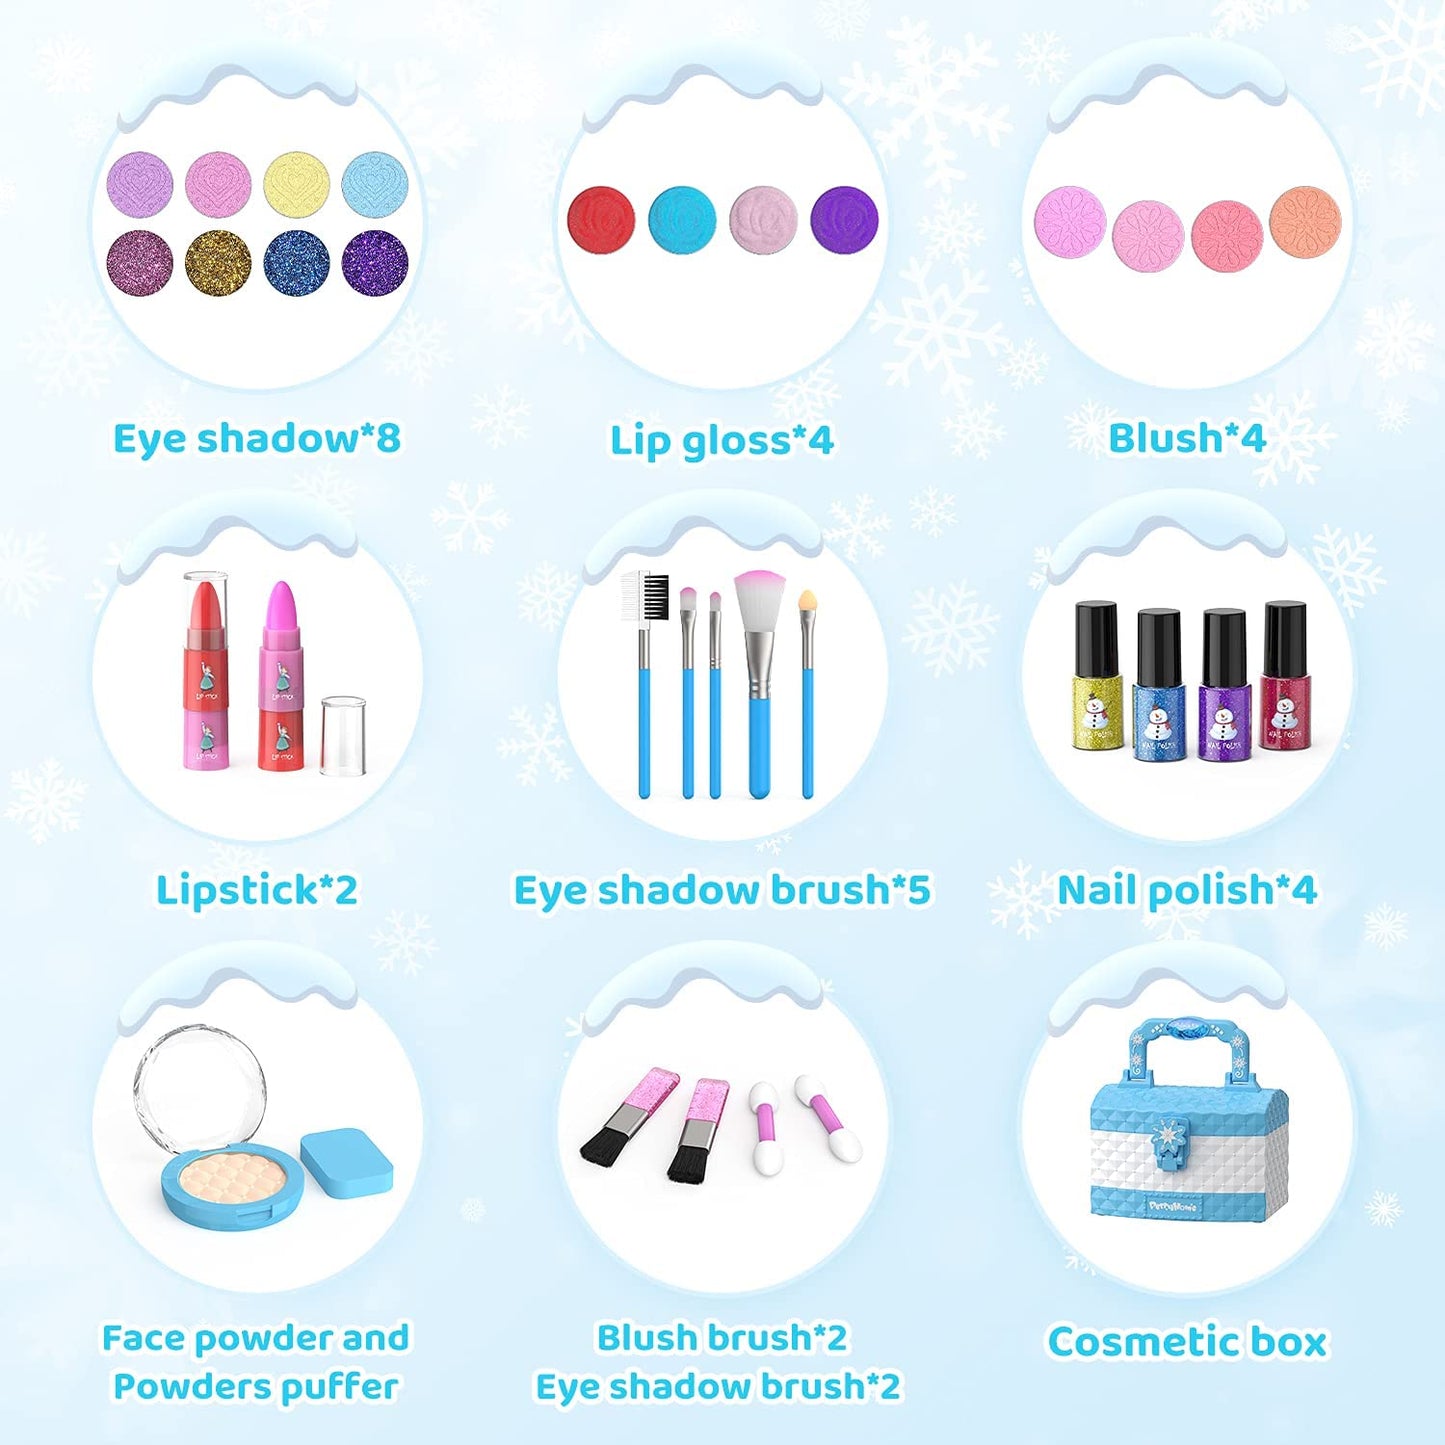 5 Best Kid-Friendly Makeup Brands and Kits